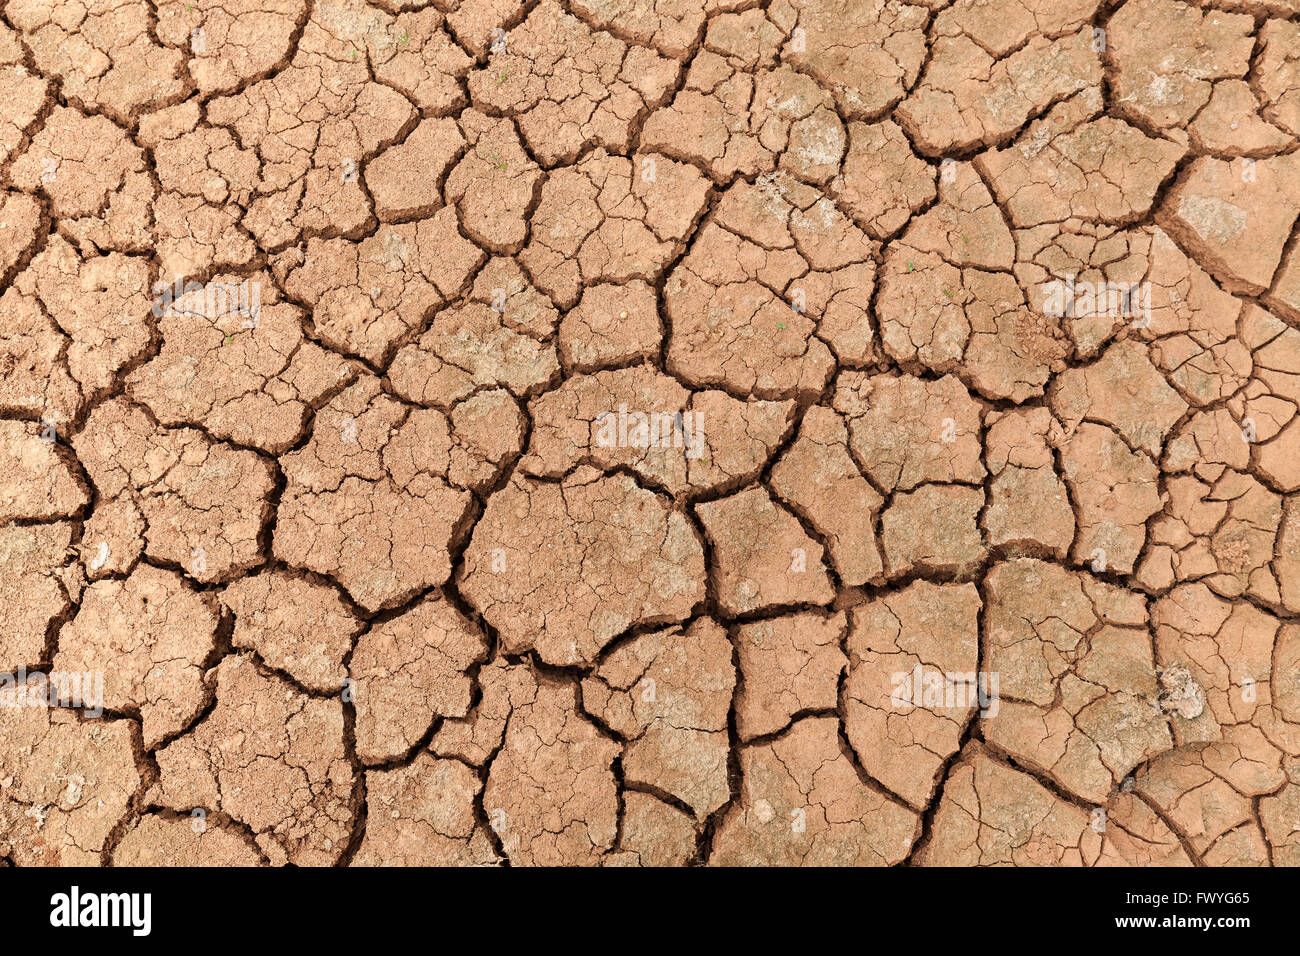 Dried earth, dry cracks in the ground, dried clay surface, Fuerteventura, Canary Islands, Spain Stock Photo